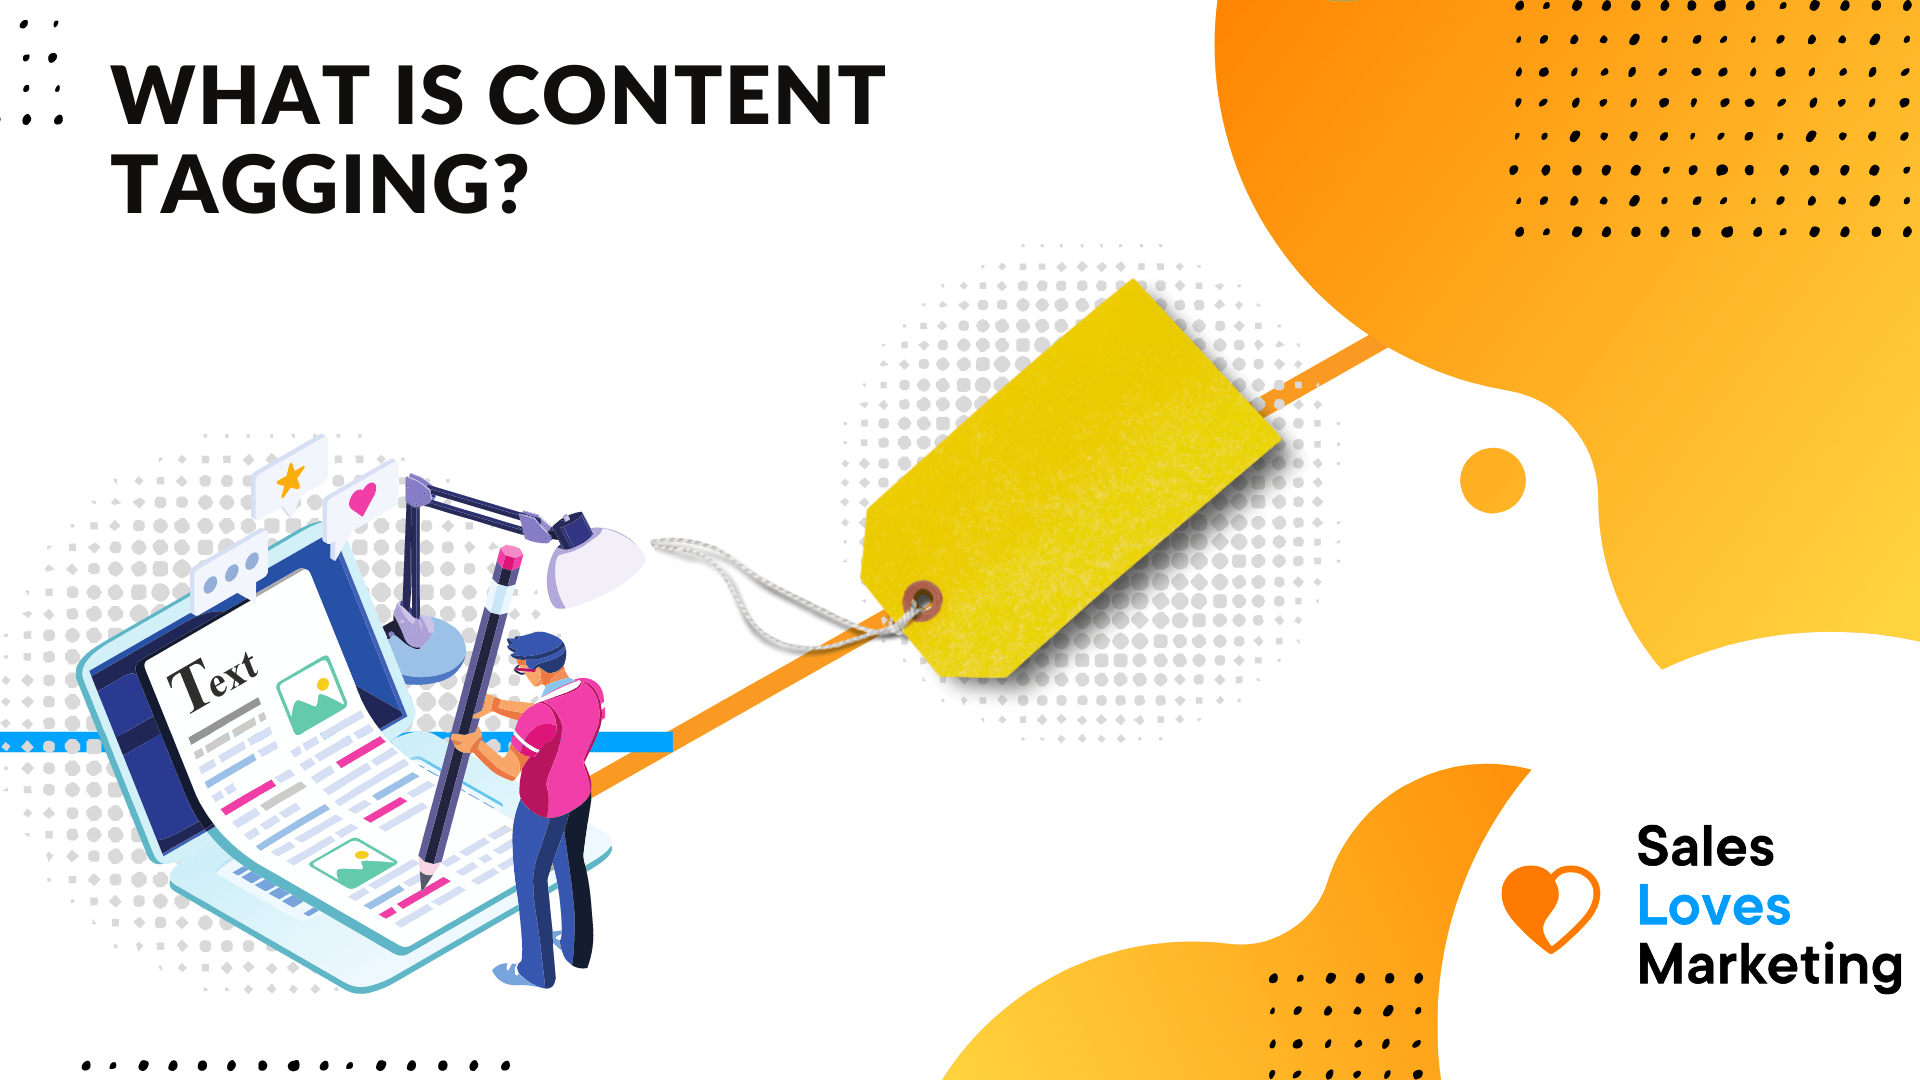 What is Content Tagging? The Untapped Potential Behind Content Tagging